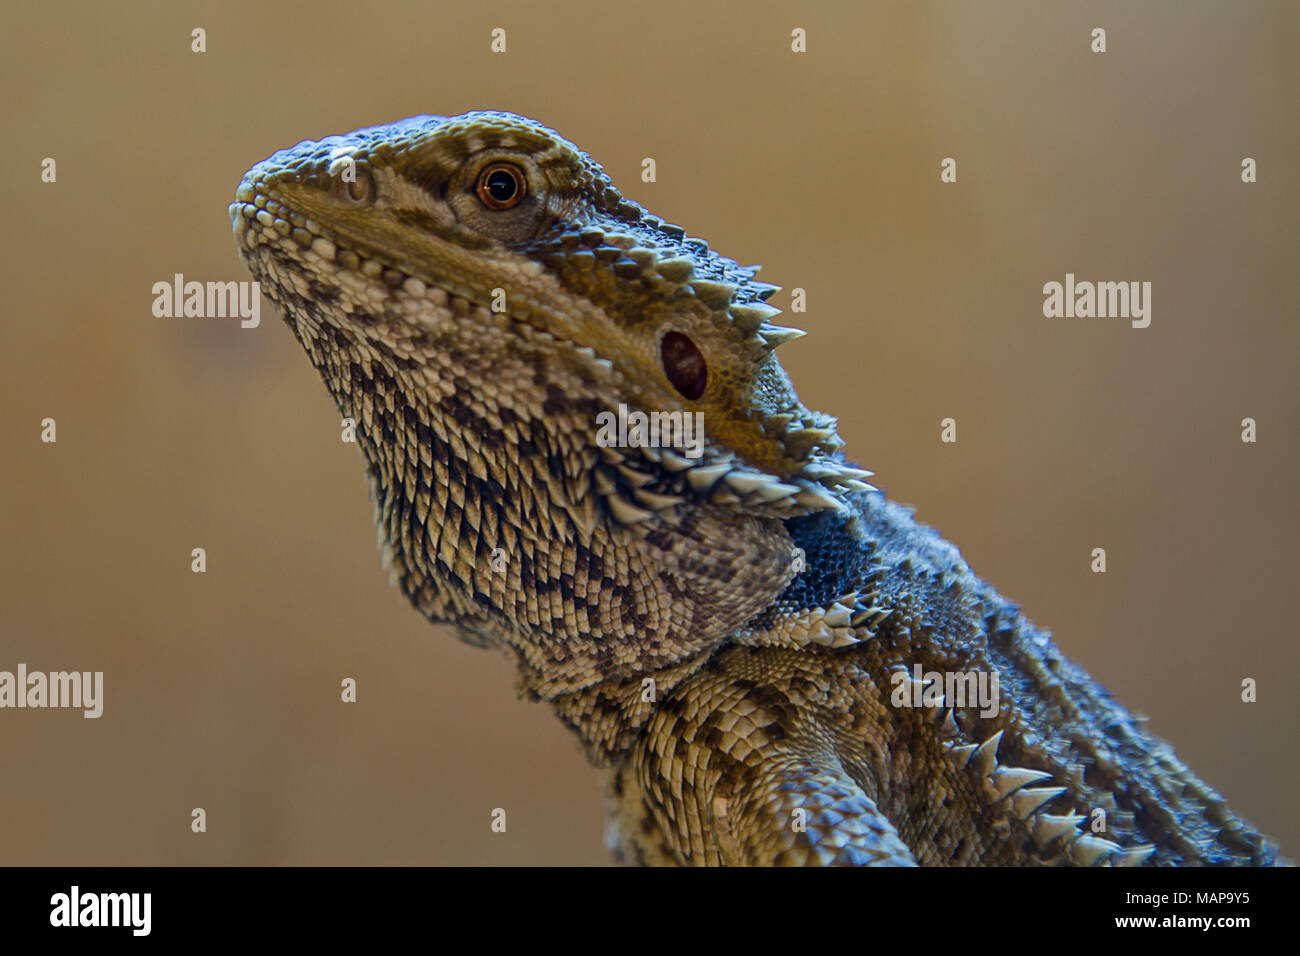 Close-up photo portrait of a bearded dragon Stock Photo